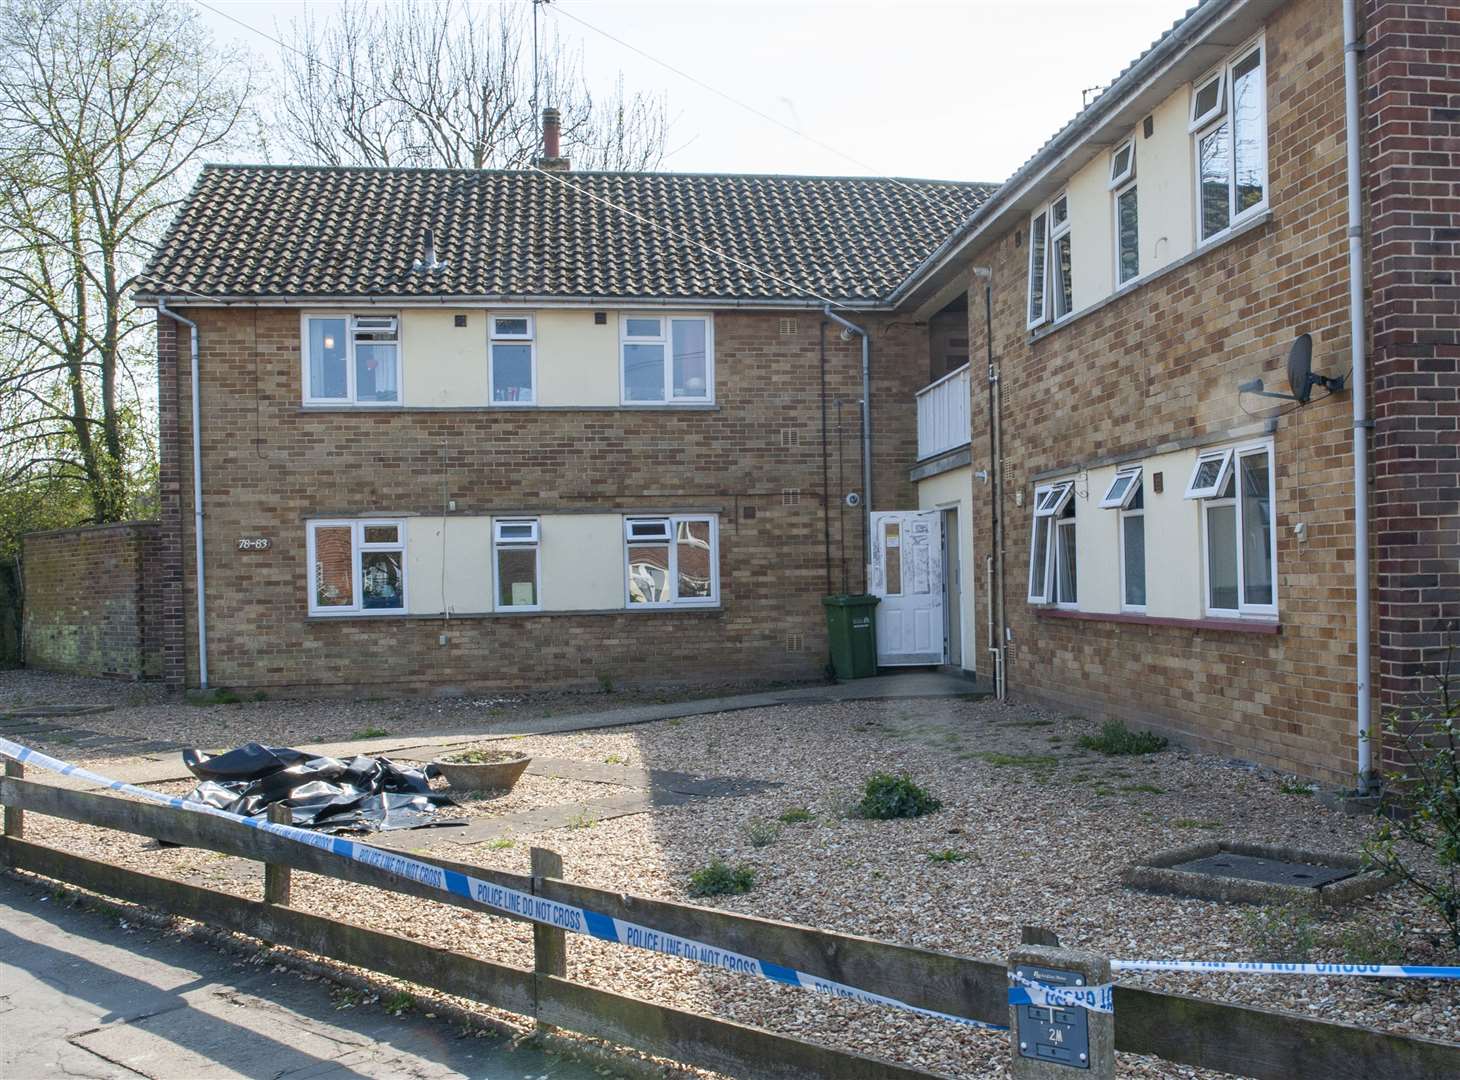 The scene after the murder at Highgate in King's Lynn